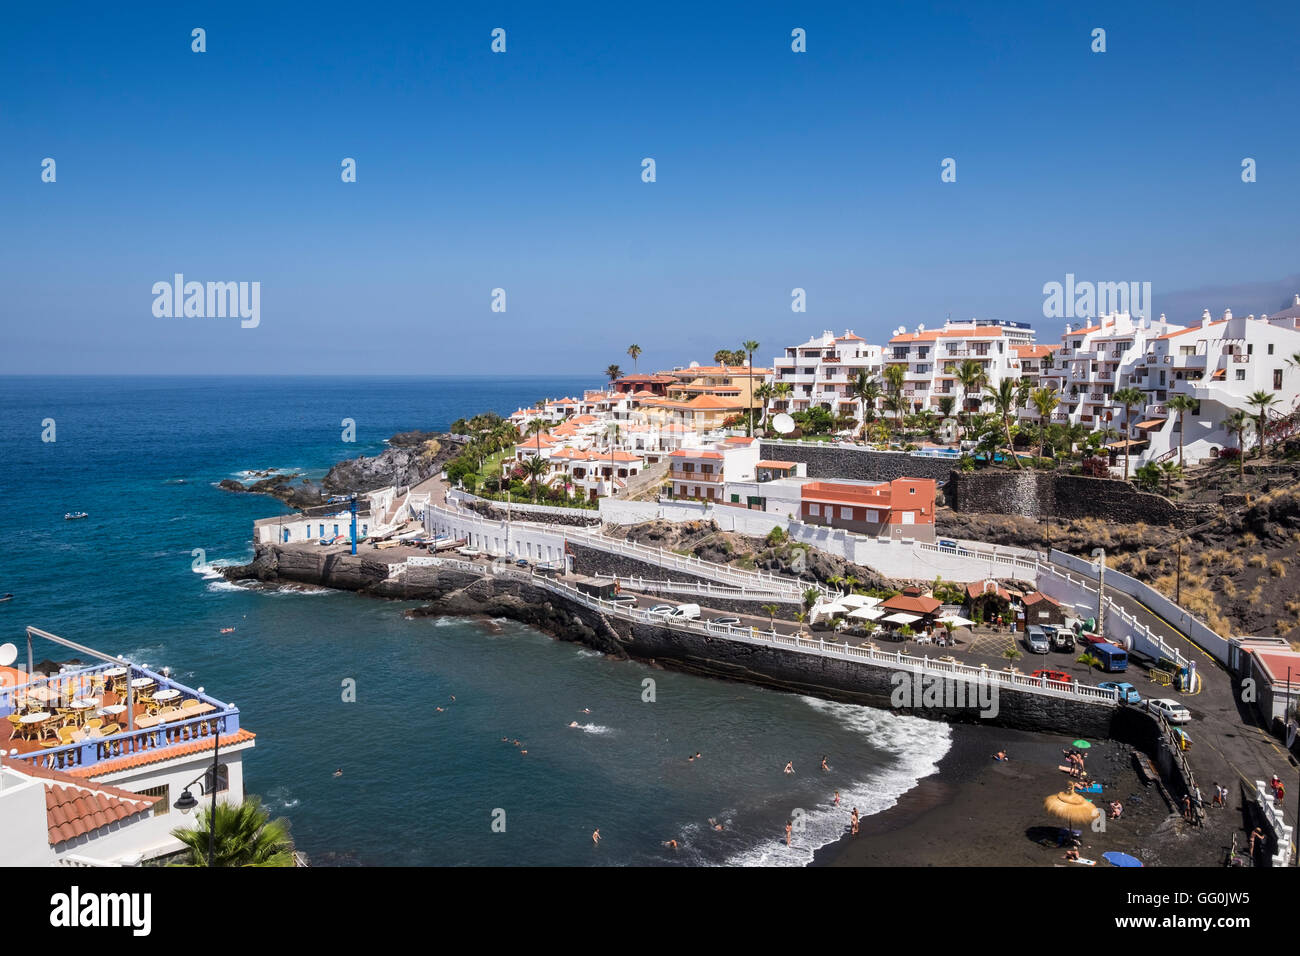 The small fishing port and beach of Puerto santiago on the west coast of Tenerife, Canary Islands, Spain Stock Photo